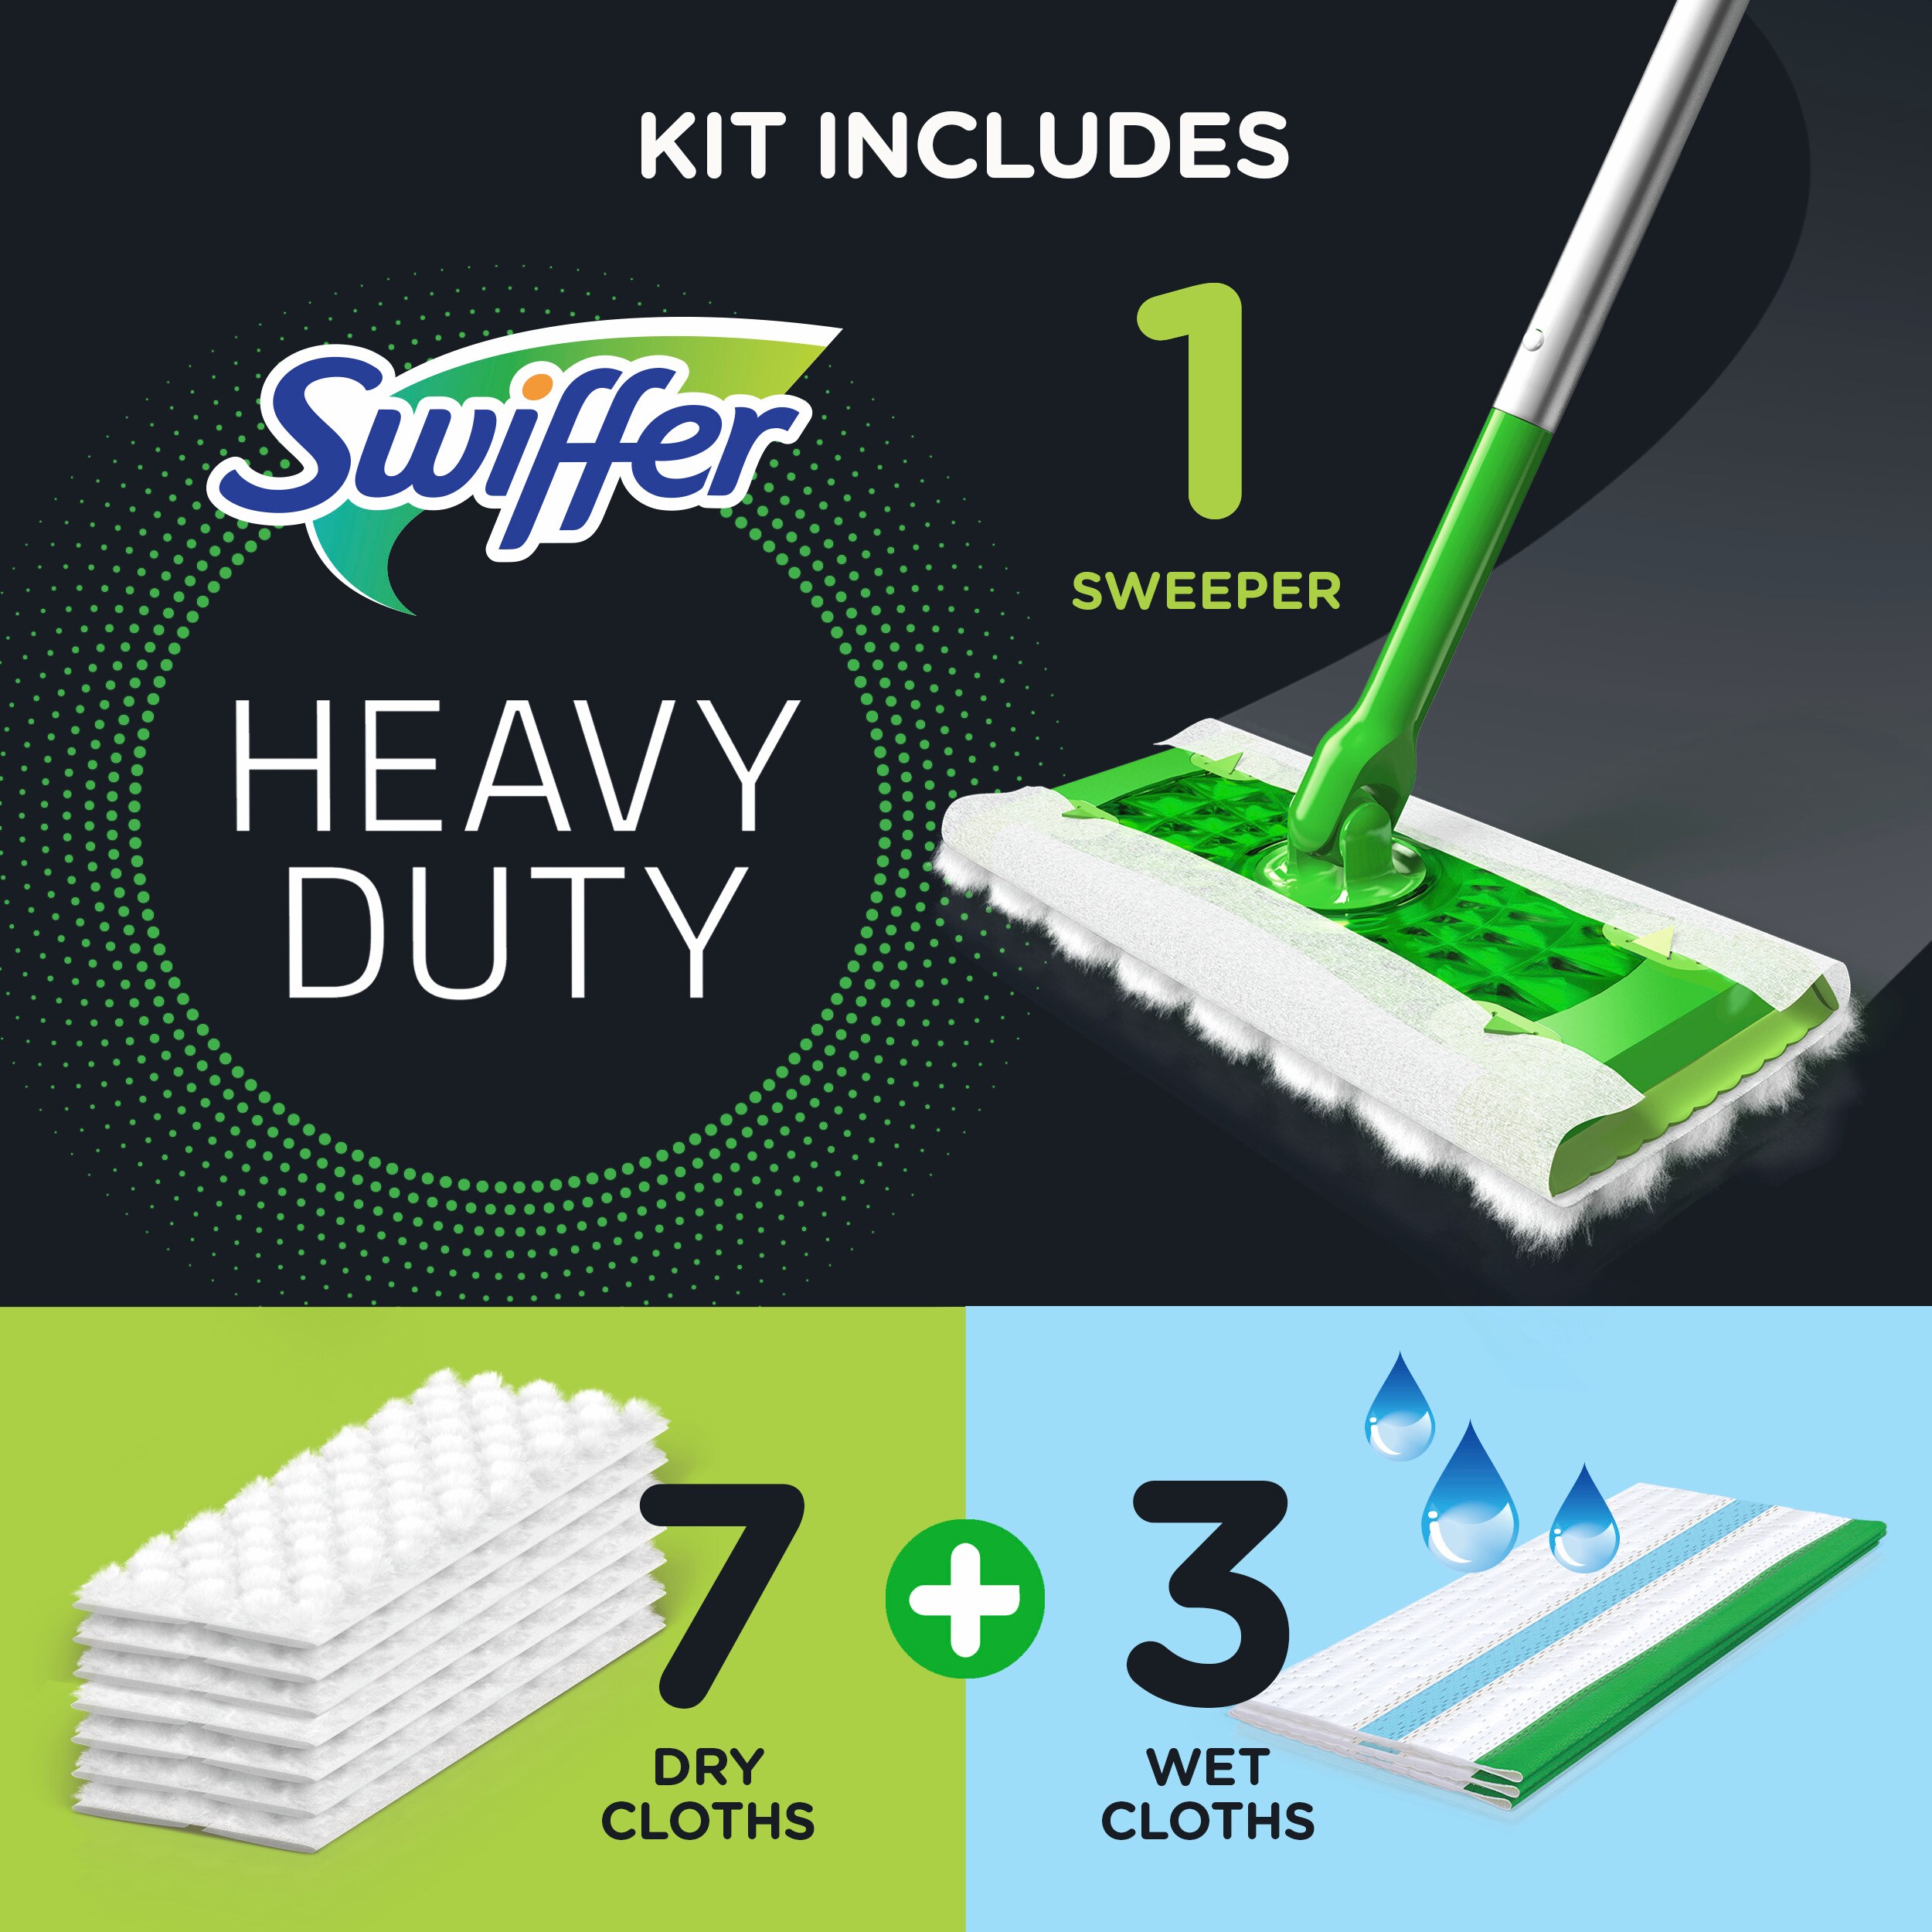 1 Sweeper, 14 Dry Cloths, 6 Wet Cloths Swiffer Sweeper Dry Wet sweeping Kit 